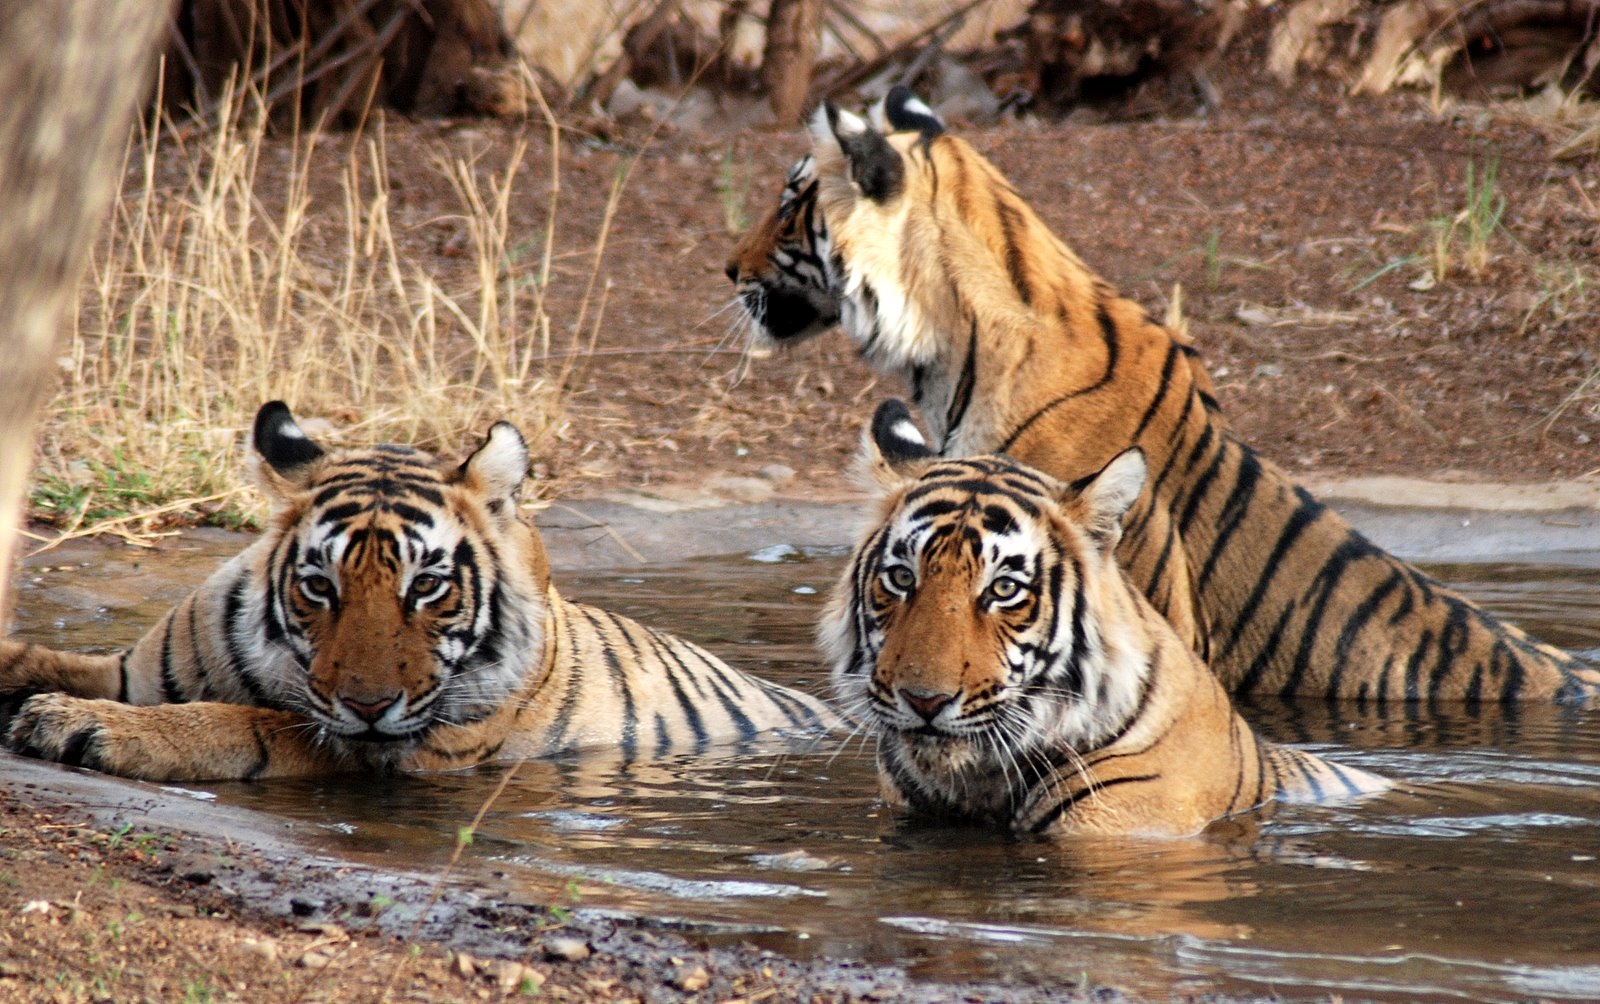 Tigers at Ranthabore National Park